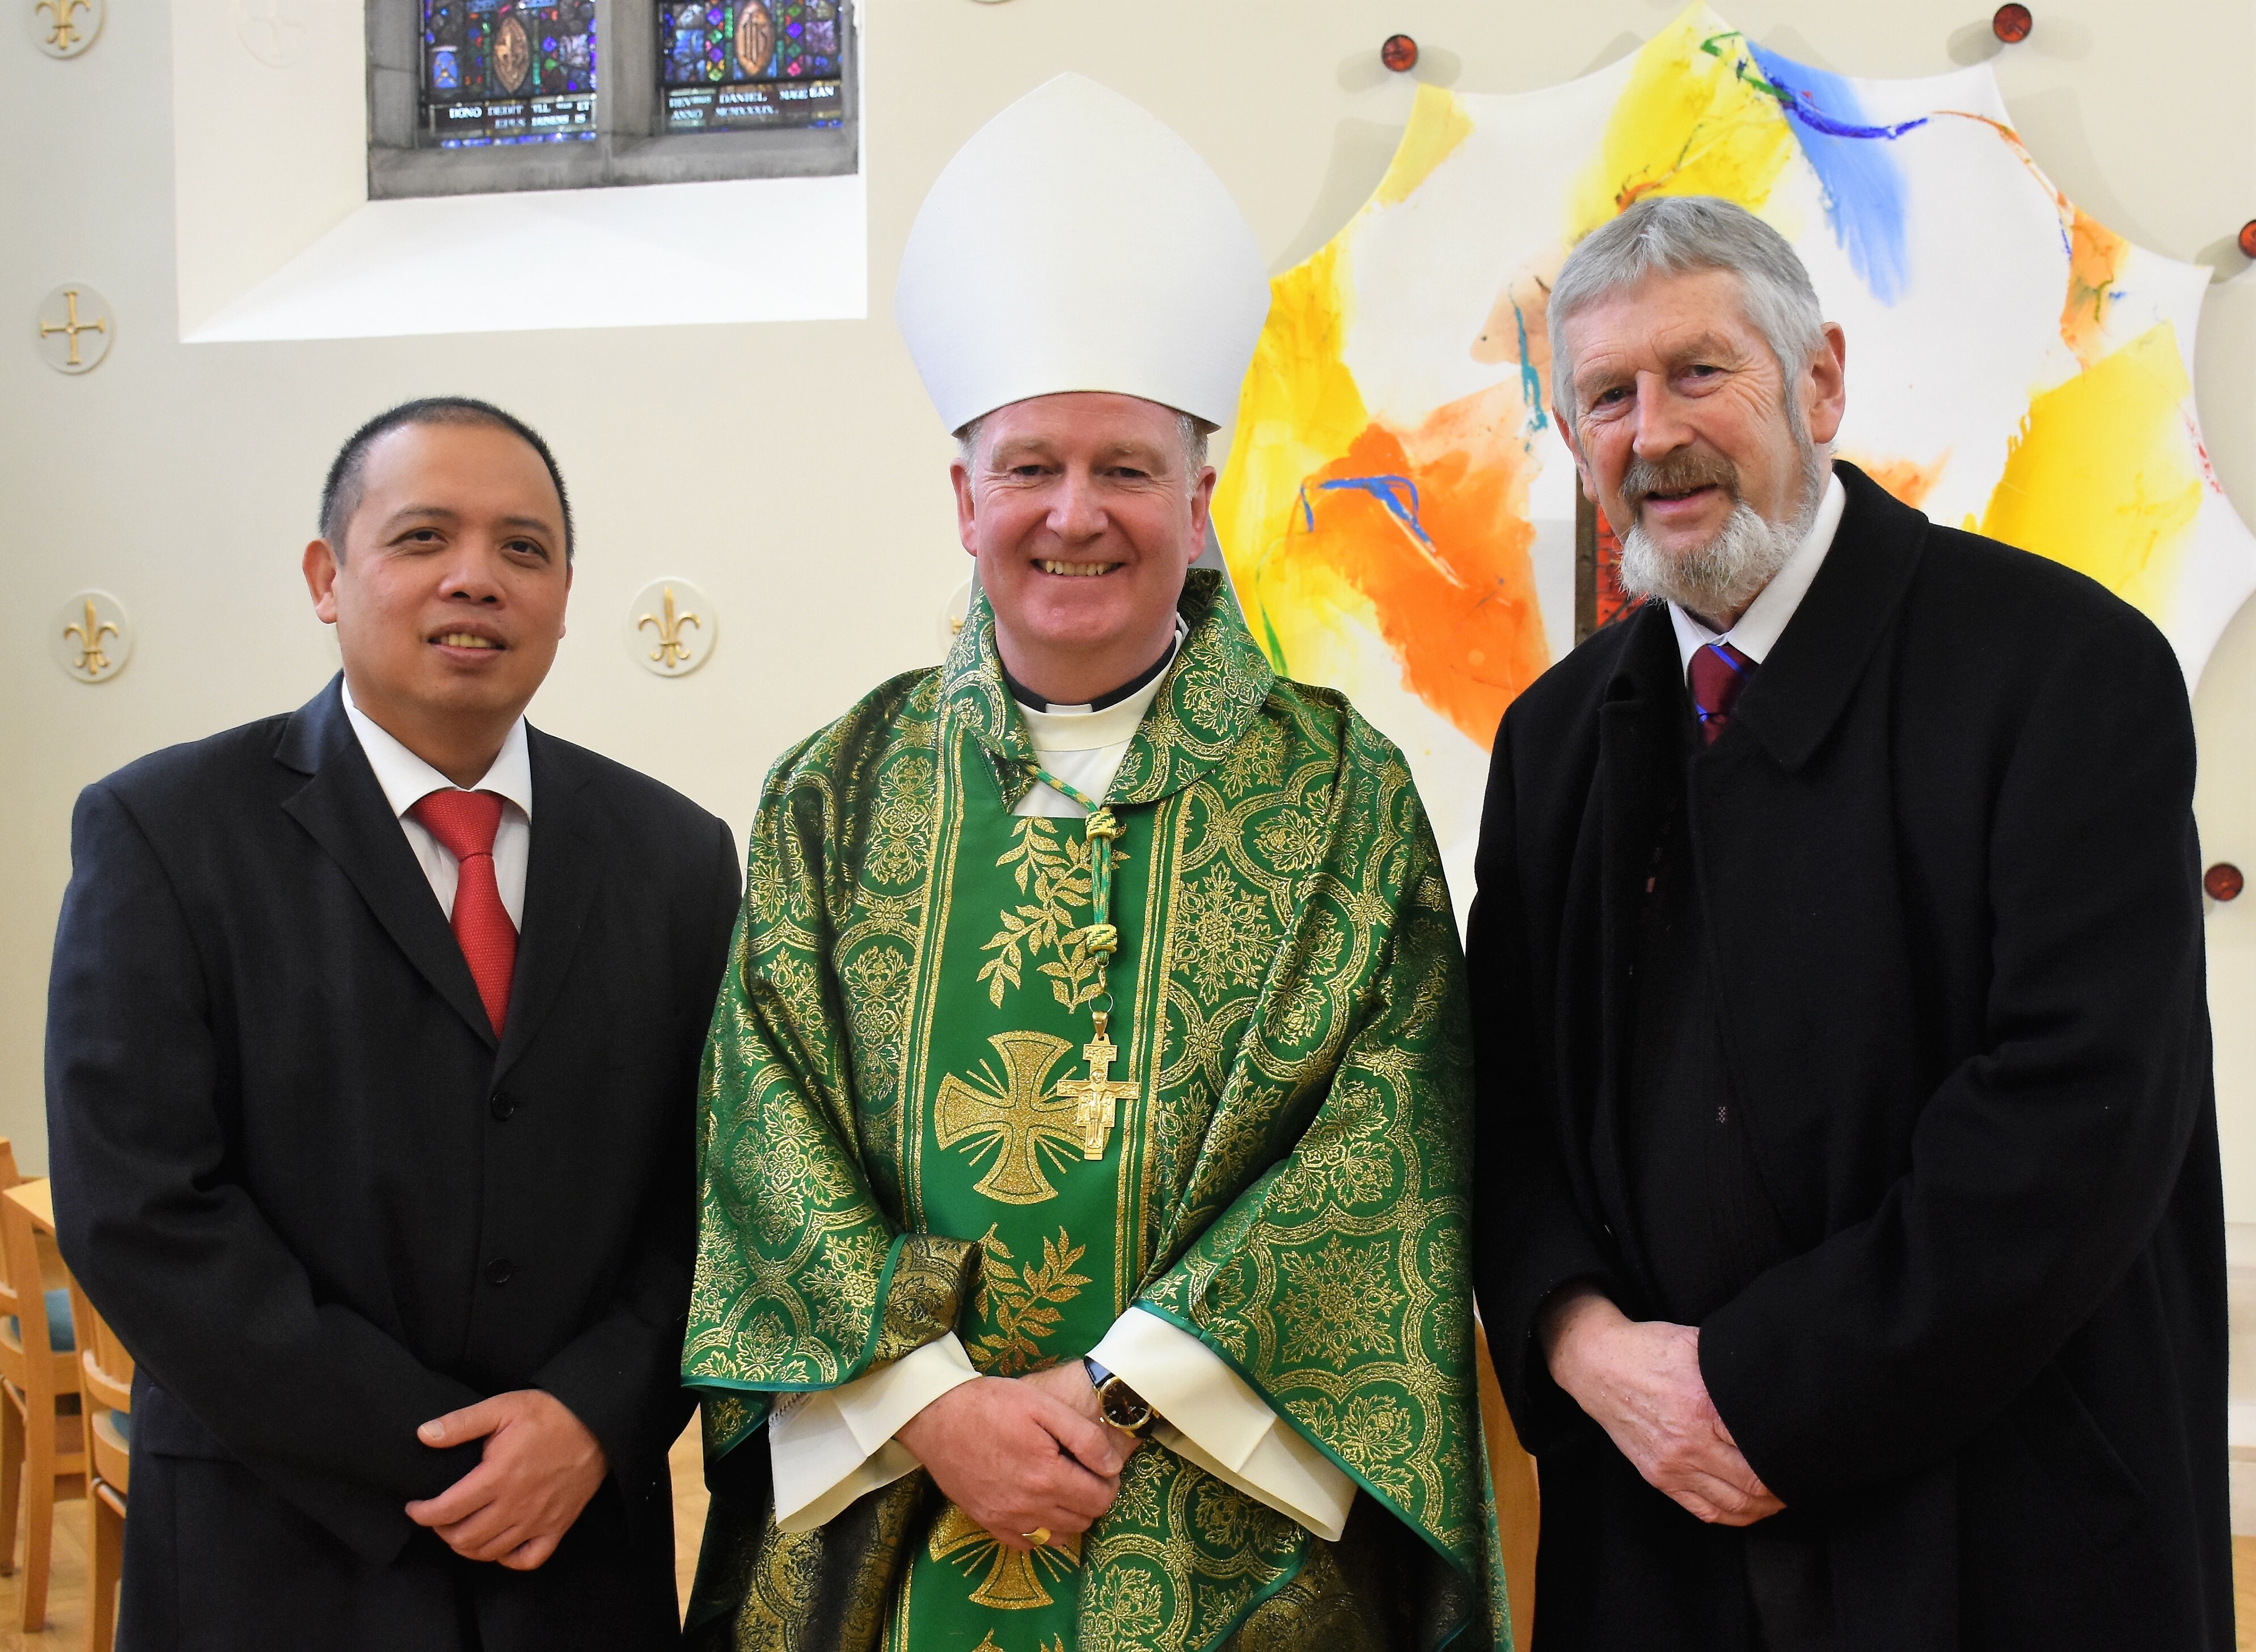 230129-Bishop-Dempsey-with-Norvil-Caguioa-L-and-Deacon-Noel-Ryan-R-the-Dublin-Diocesan-Director-of-Diaconal-Formation.jpg#asset:11432